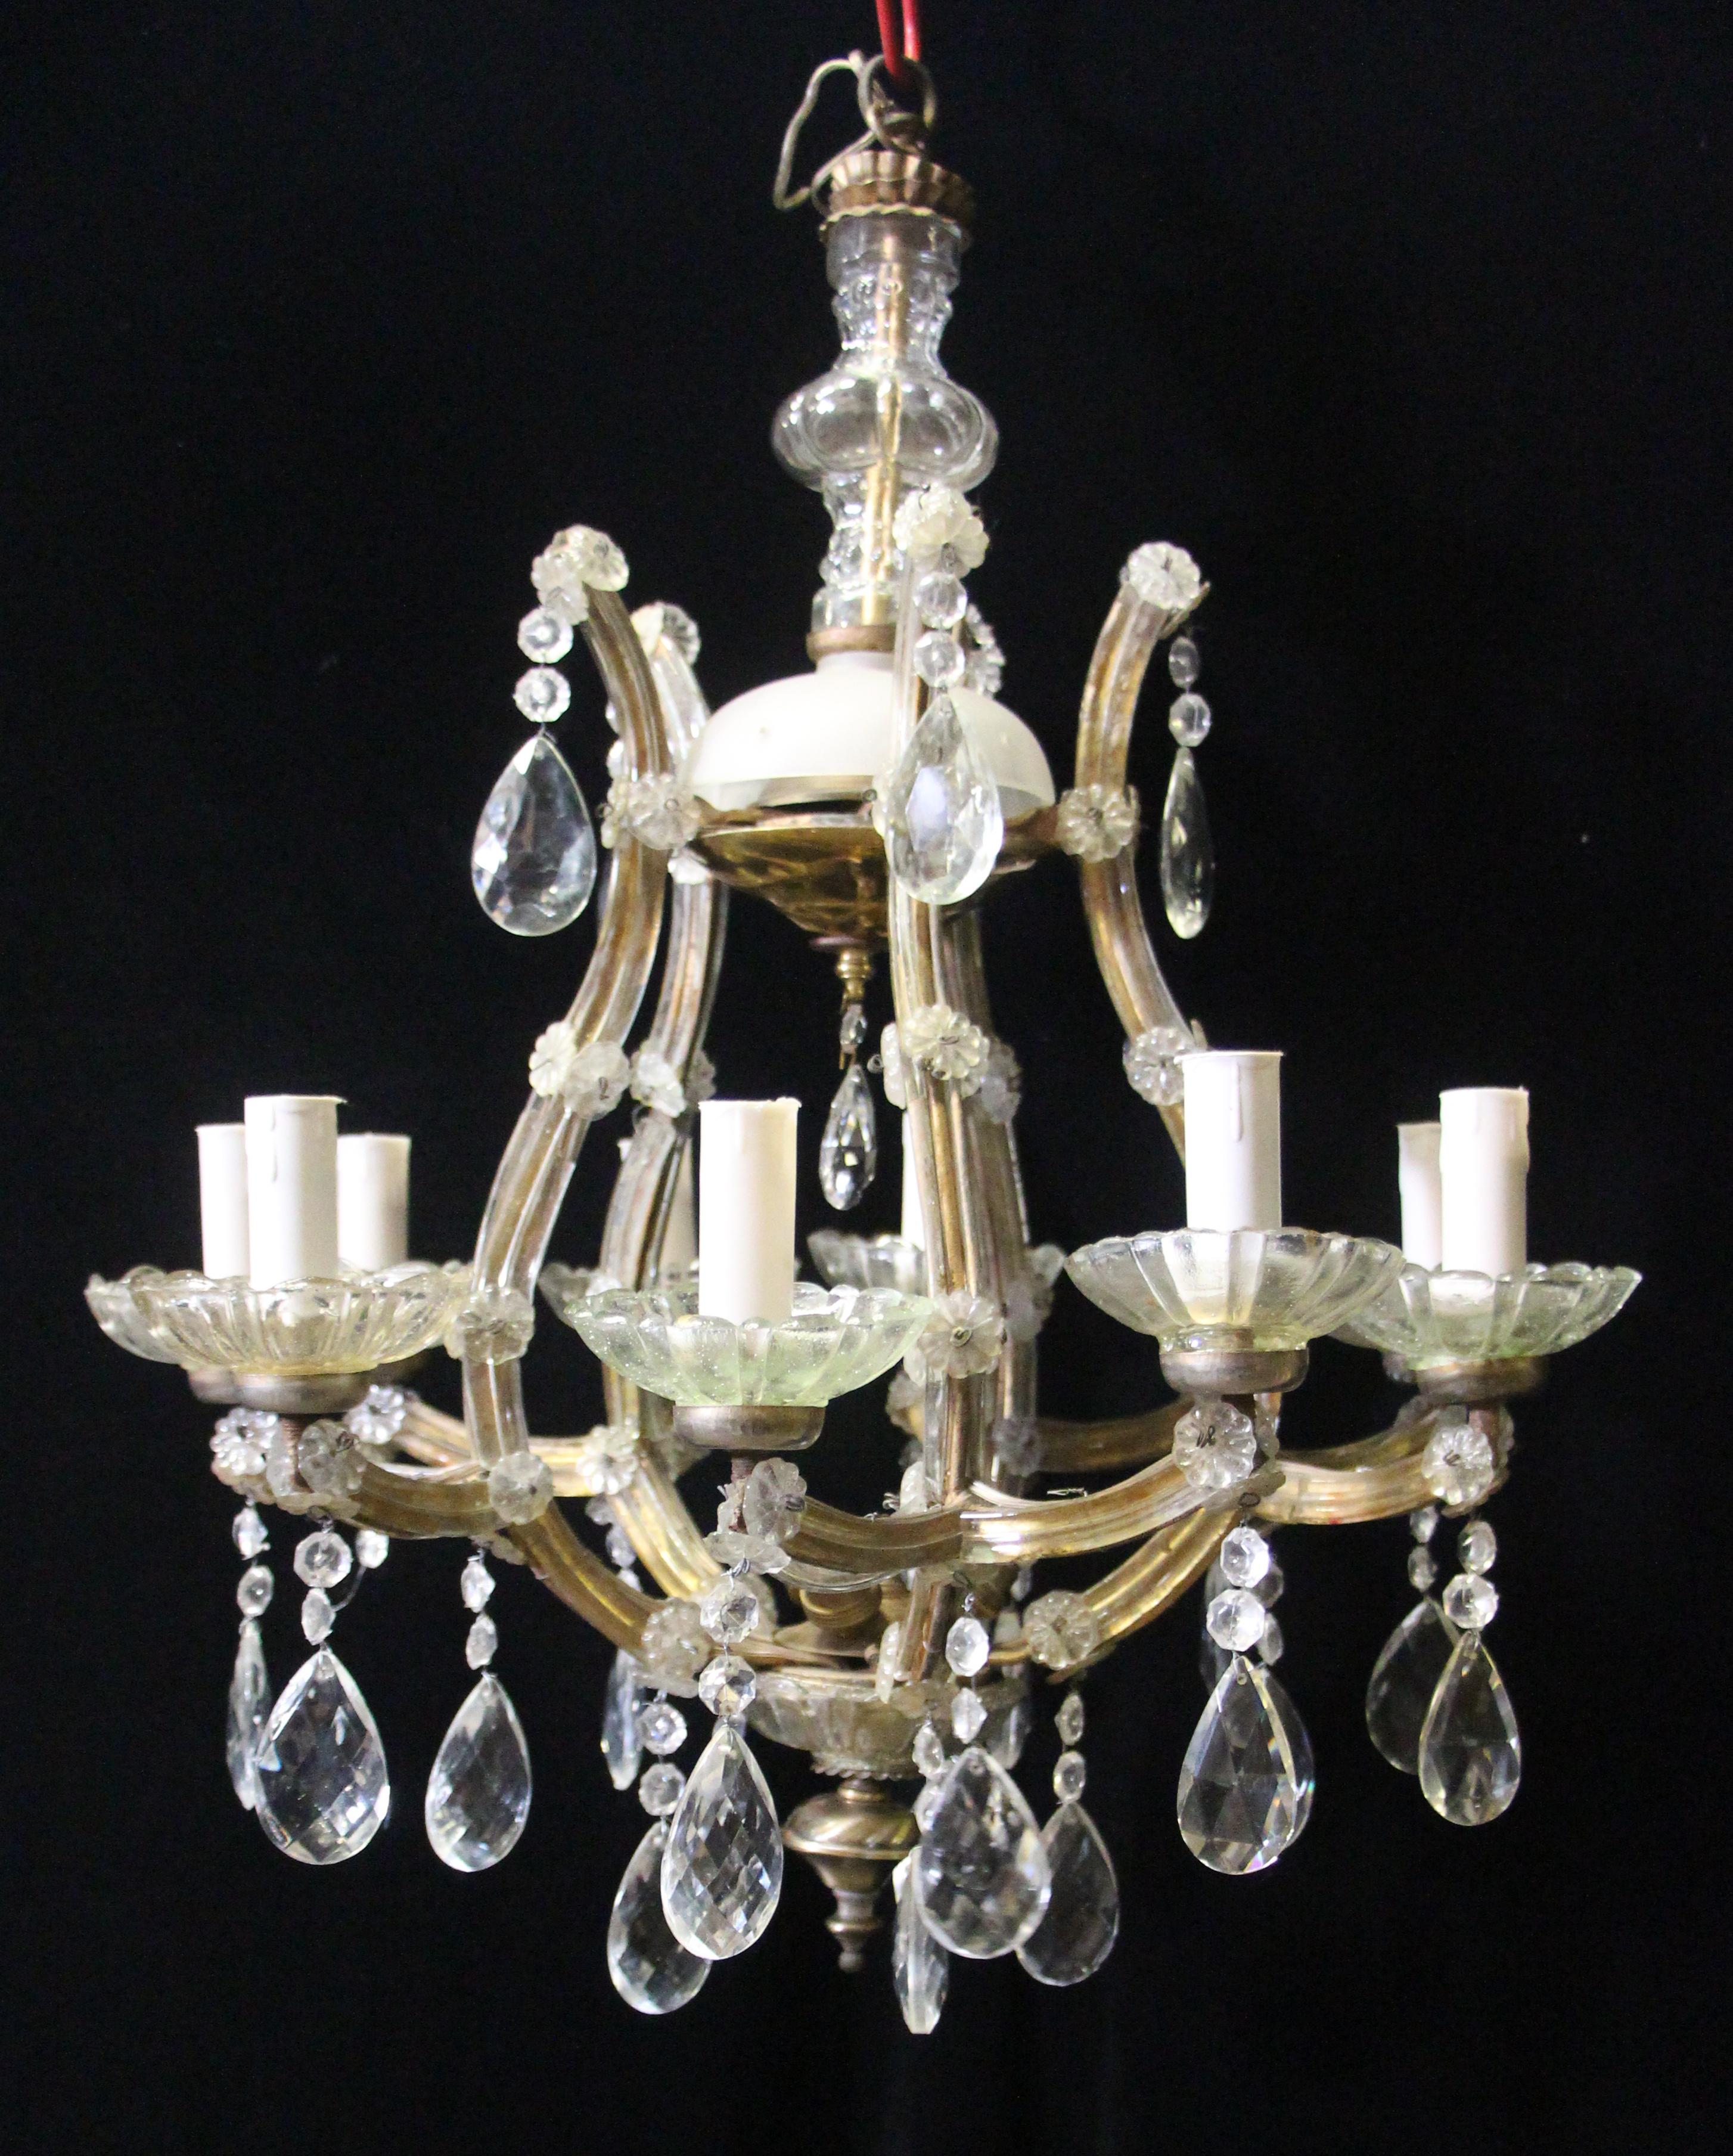 European Antique Marie Therese Crystal 10 Arm Chandelier 13 Lights Small Petite